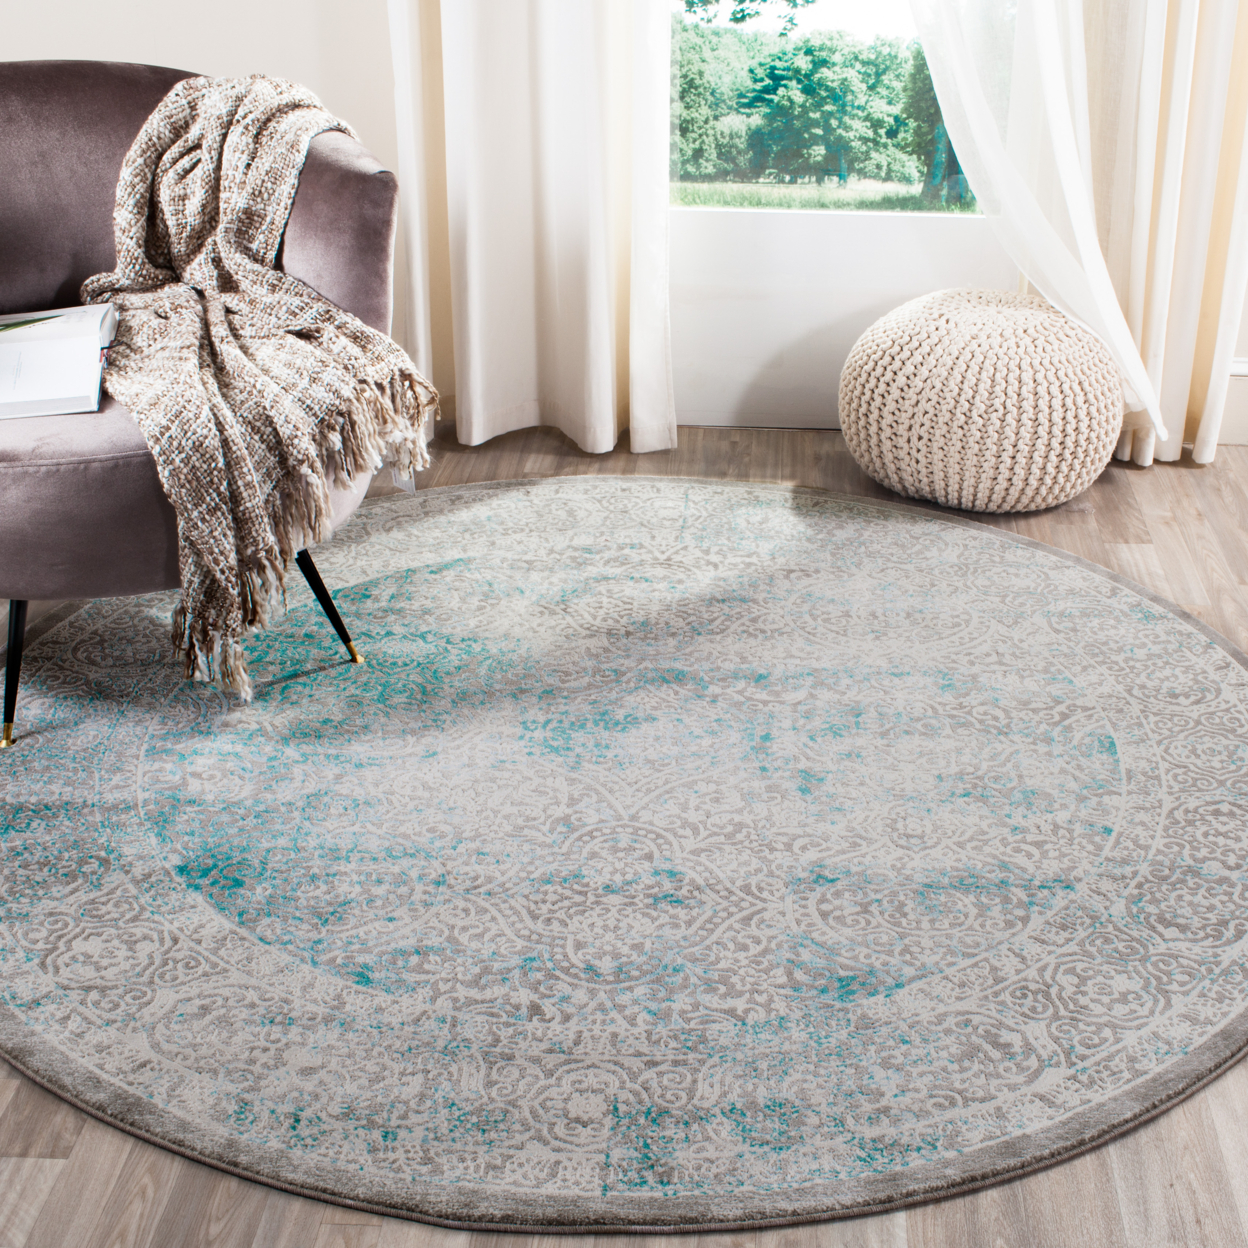 SAFAVIEH Passion Collection PAS401B Turquoise / Ivory Rug - 2' 2 X 18'